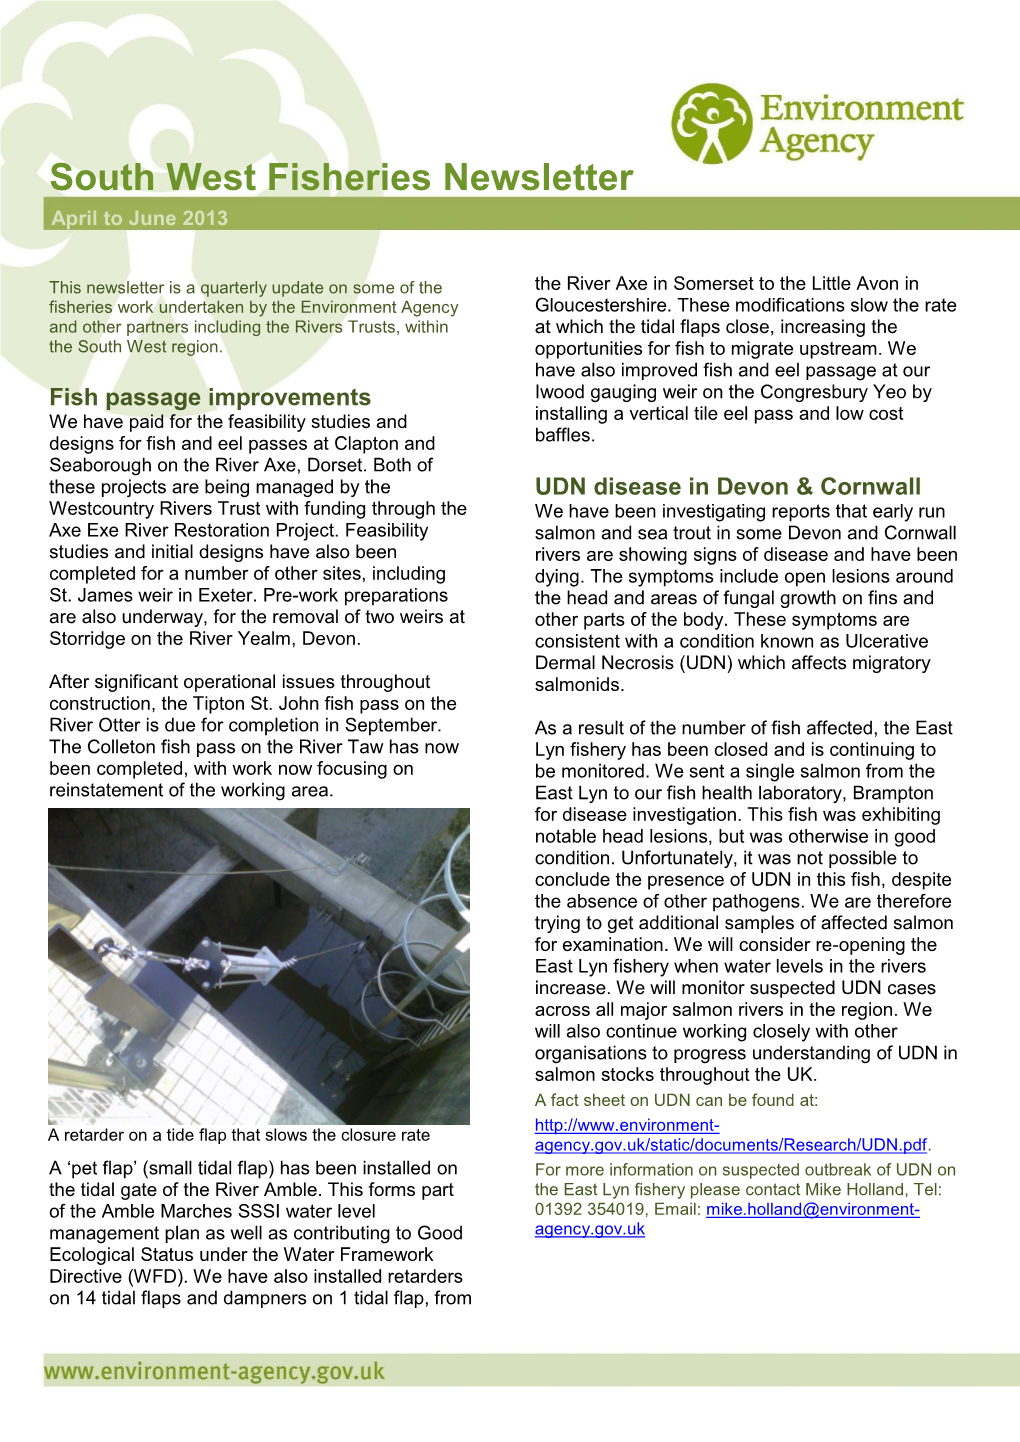 South West Fisheries Newsletter April to June 2013